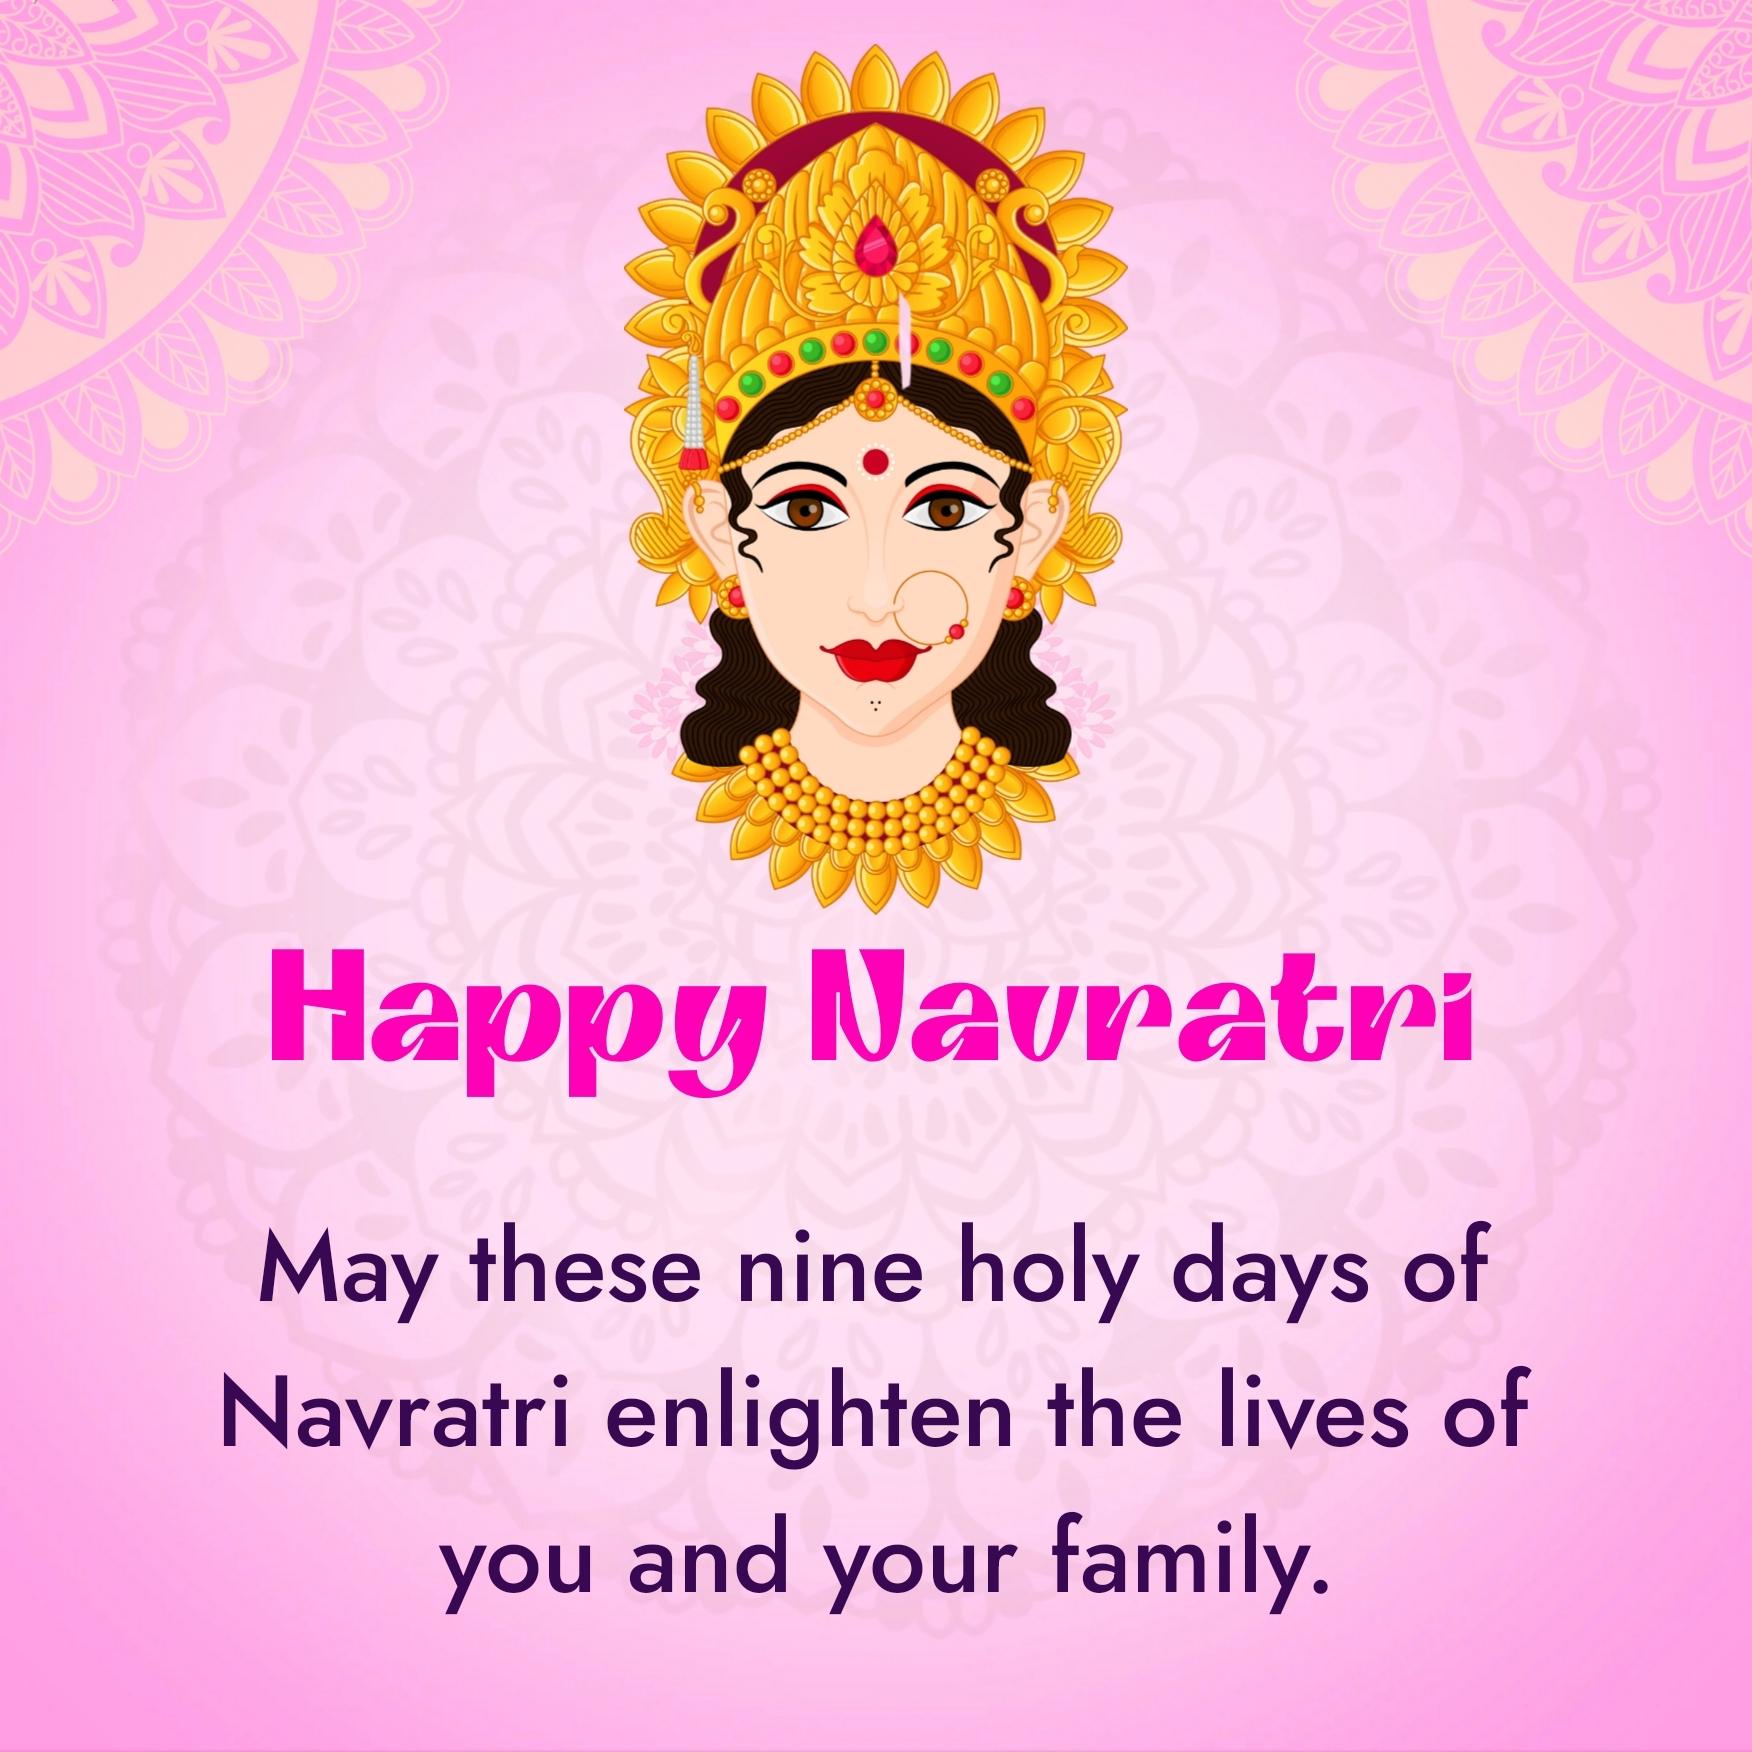 May these nine holy days of Navratri enlighten the lives